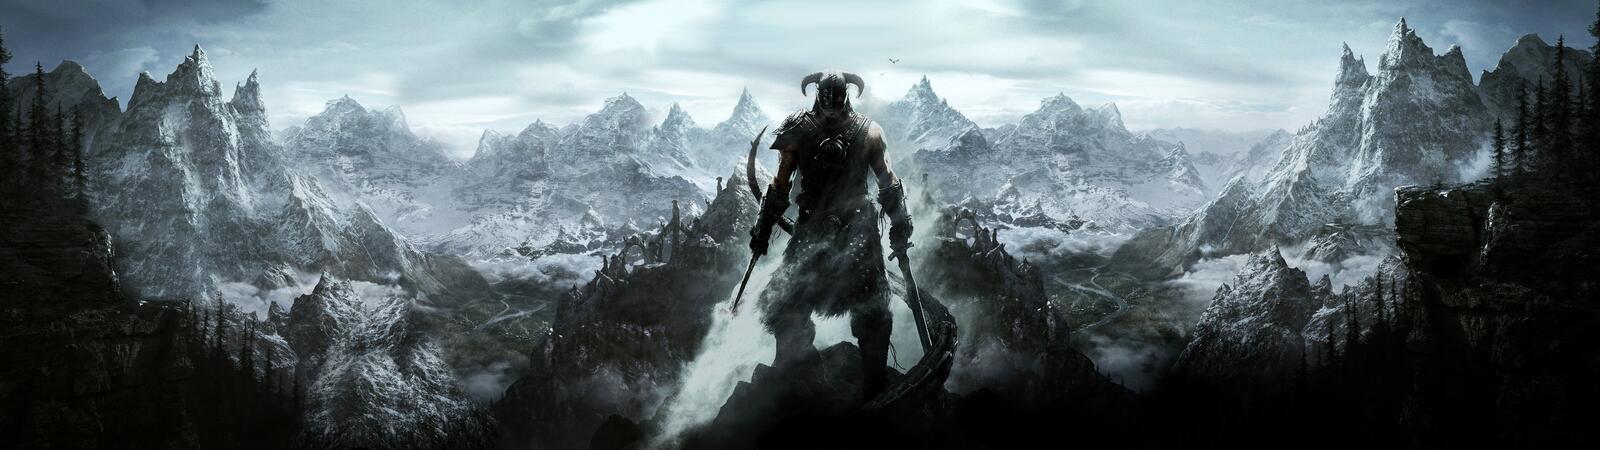 Wallpapers knight black and white skyrim on the desktop